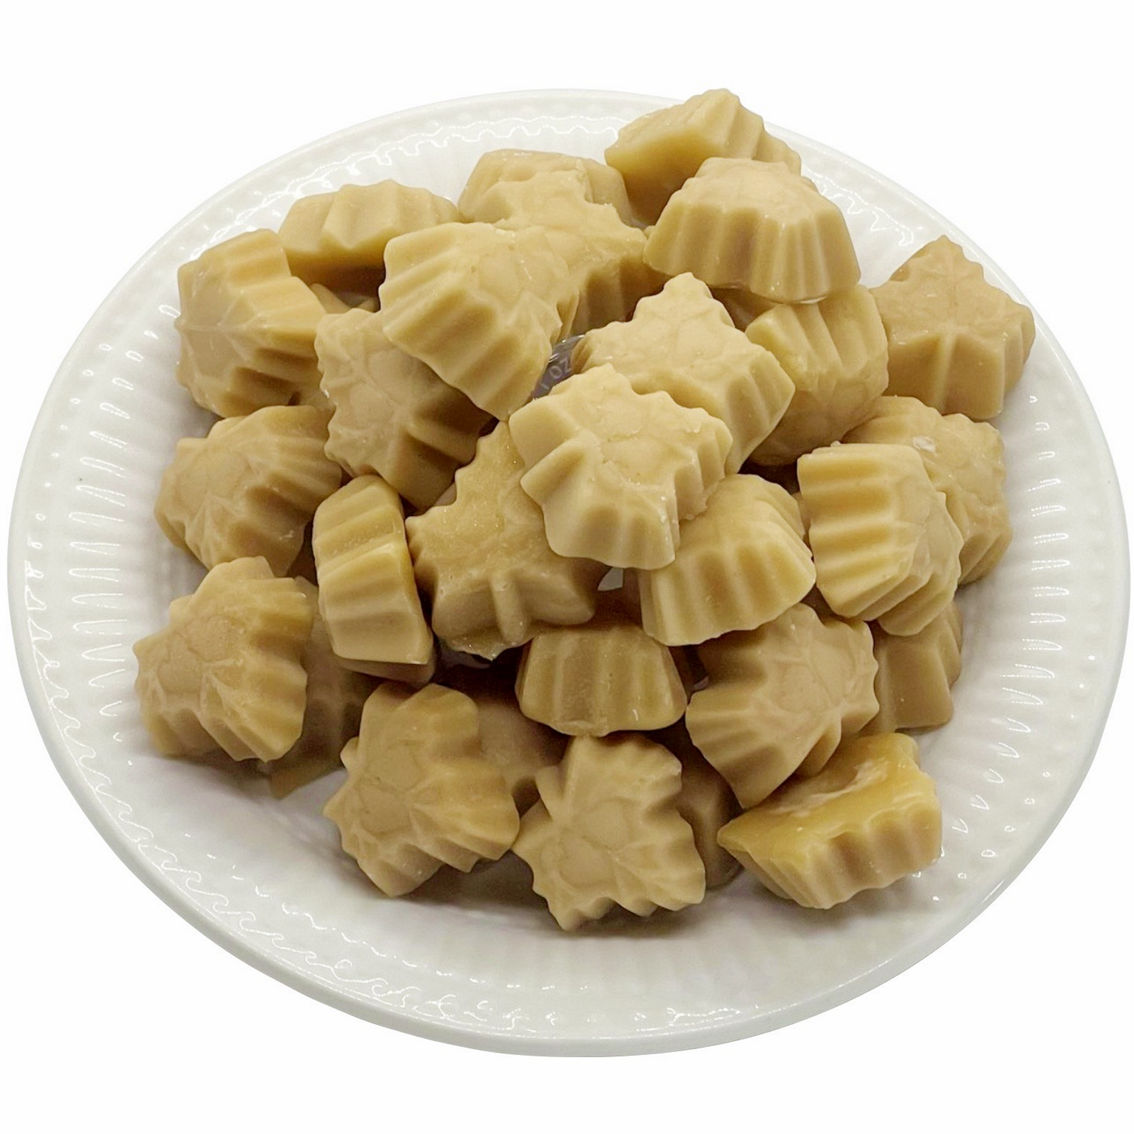 Sterling Valley Organic Old Fashioned Maple Candies 2 lb. - Image 2 of 2